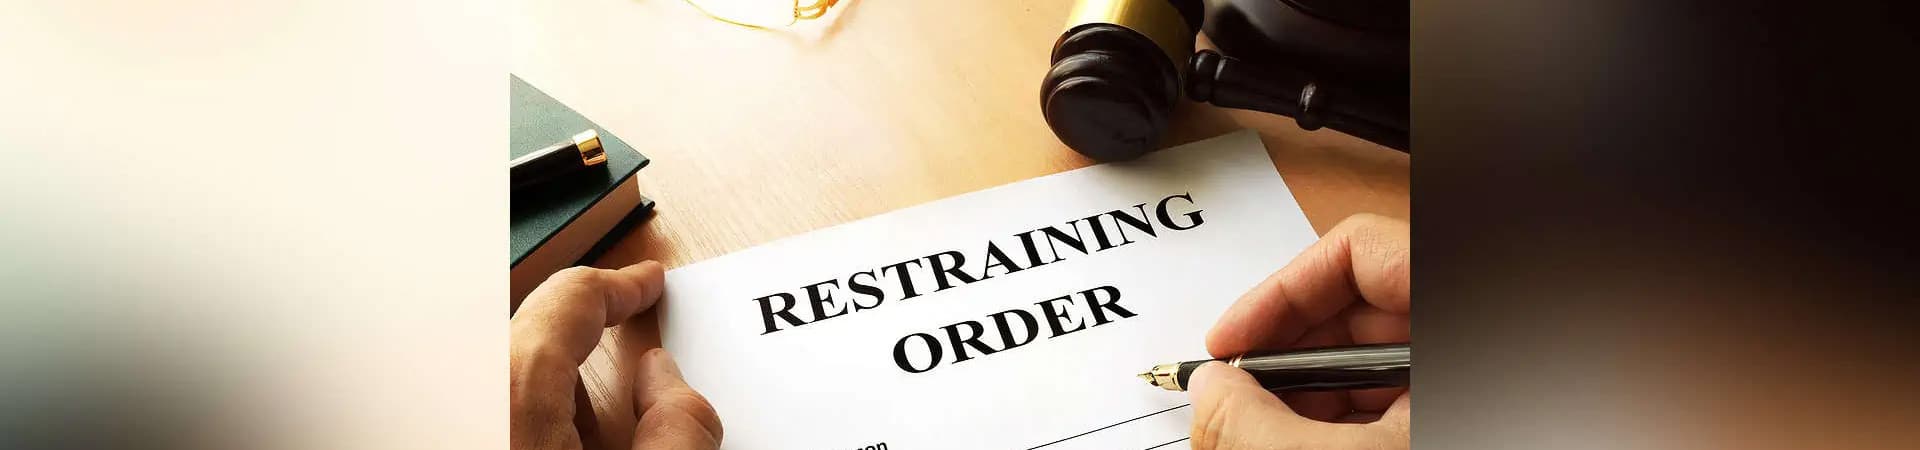 Confiscation and restraining orders